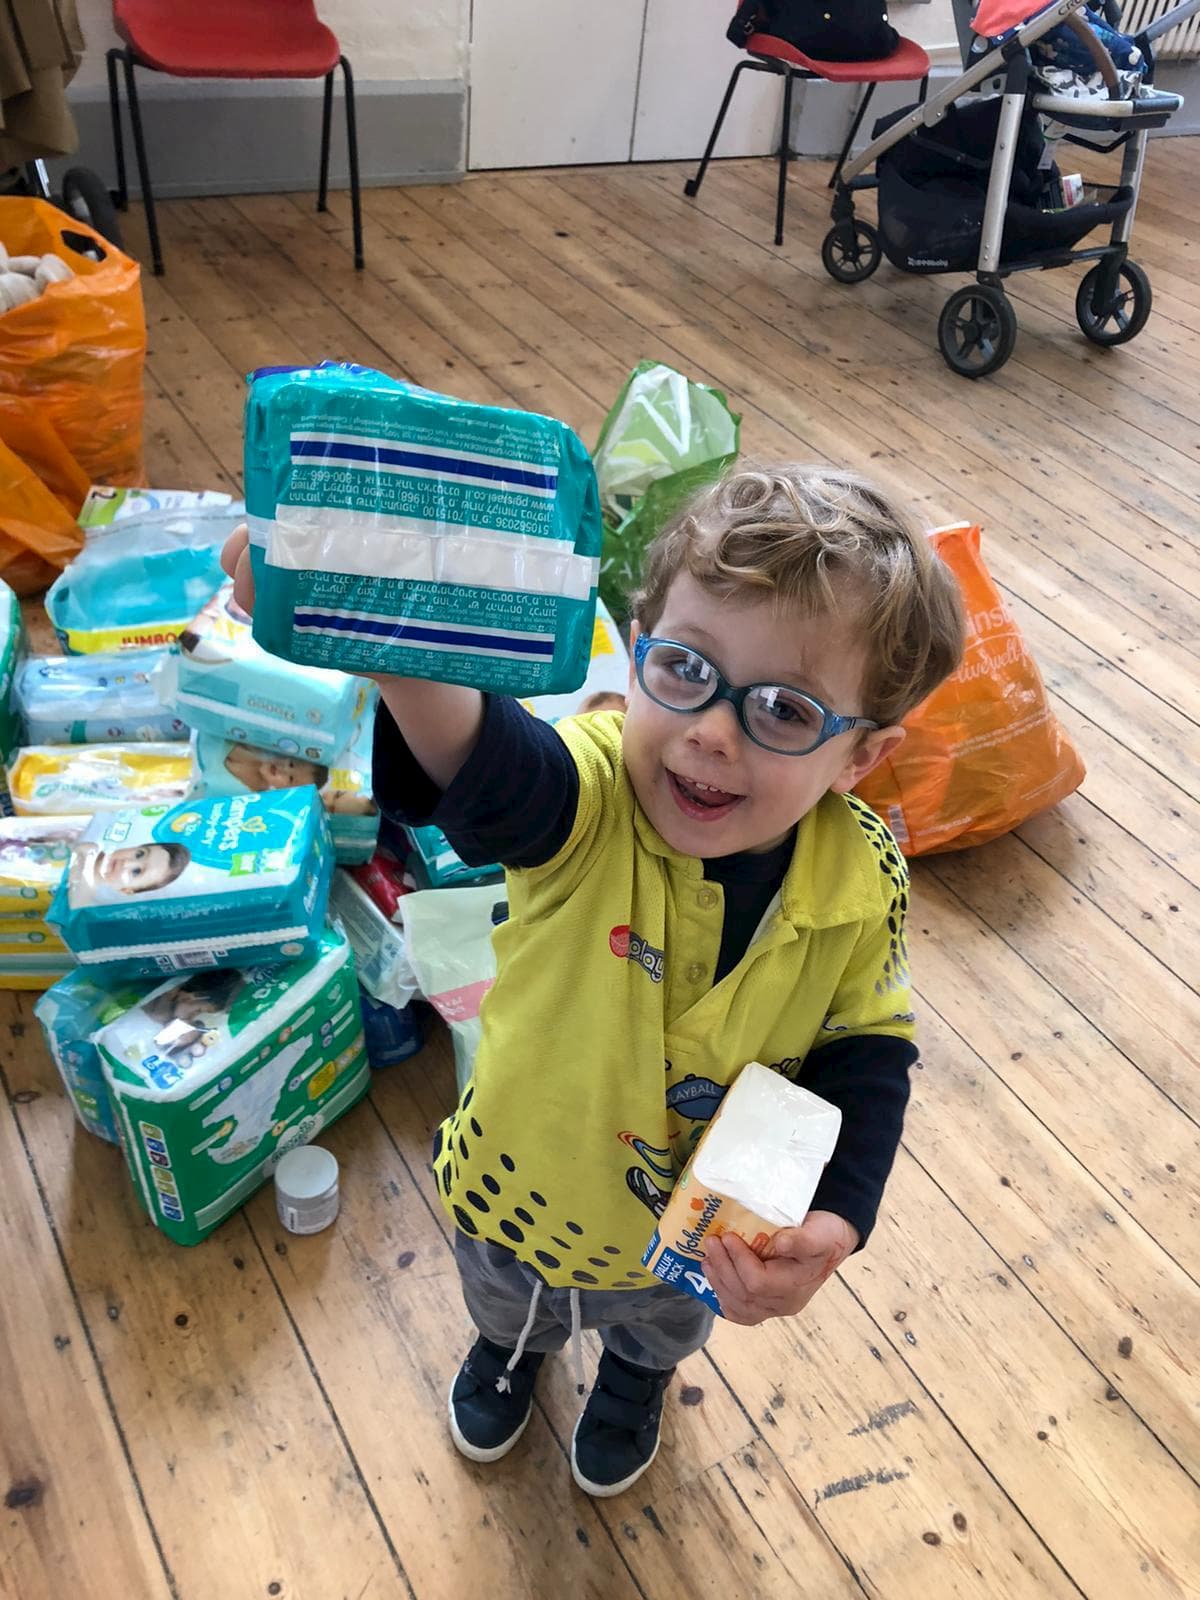 A child with glasses holding up nappies